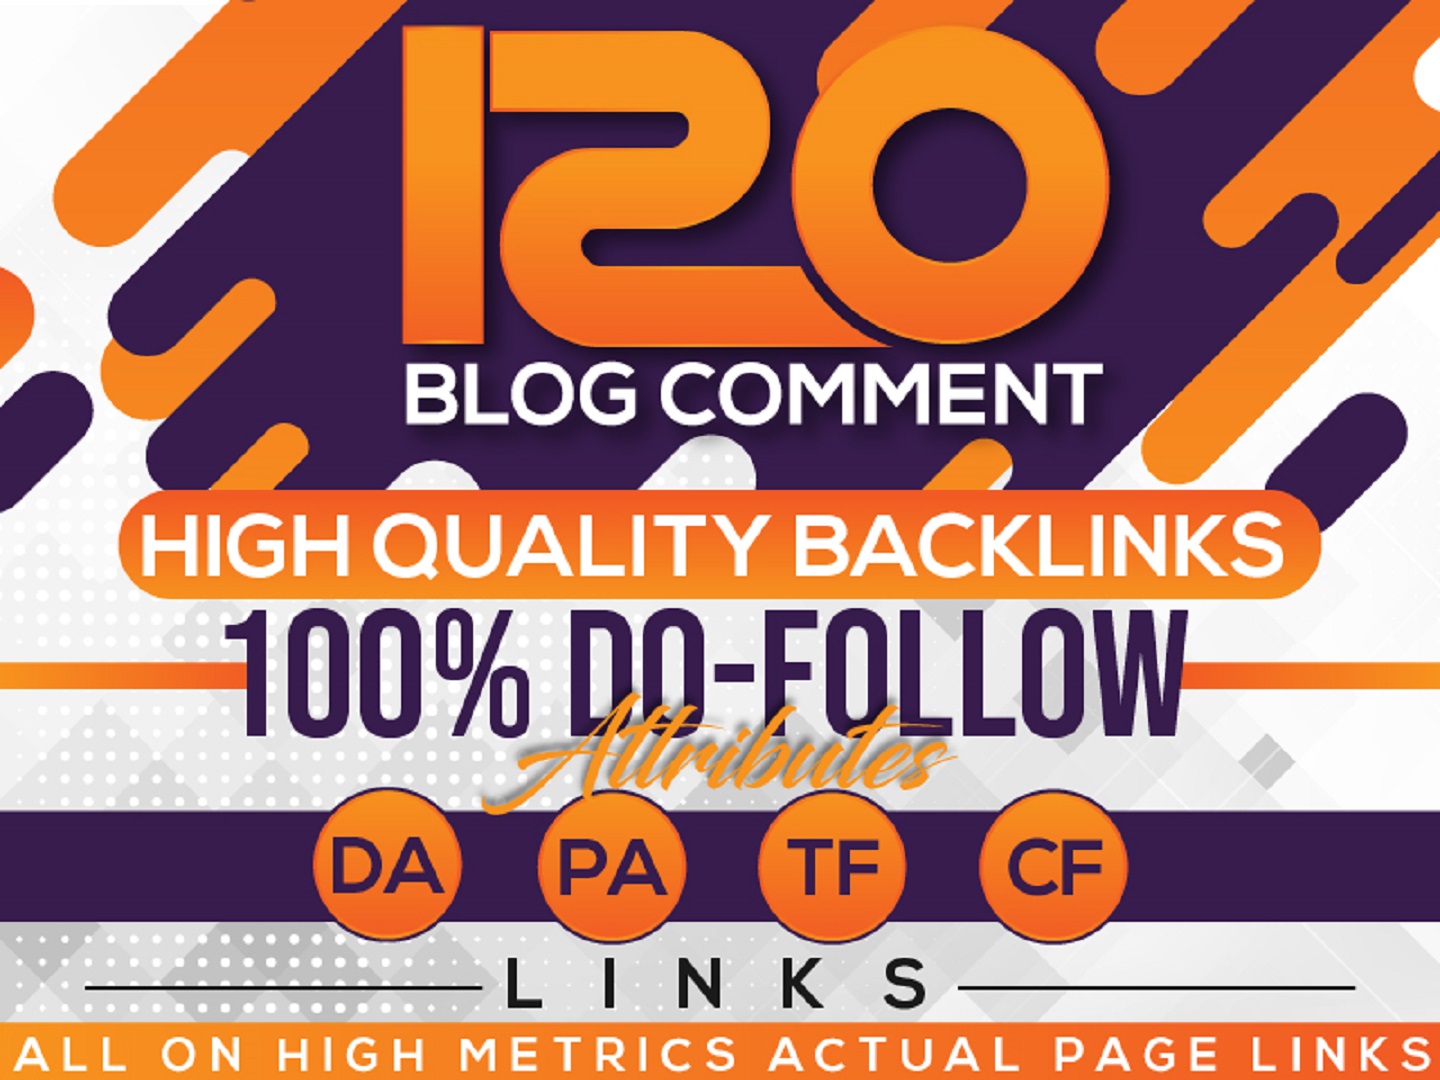 Manually 120 blog comment seo backlinks with high authority da